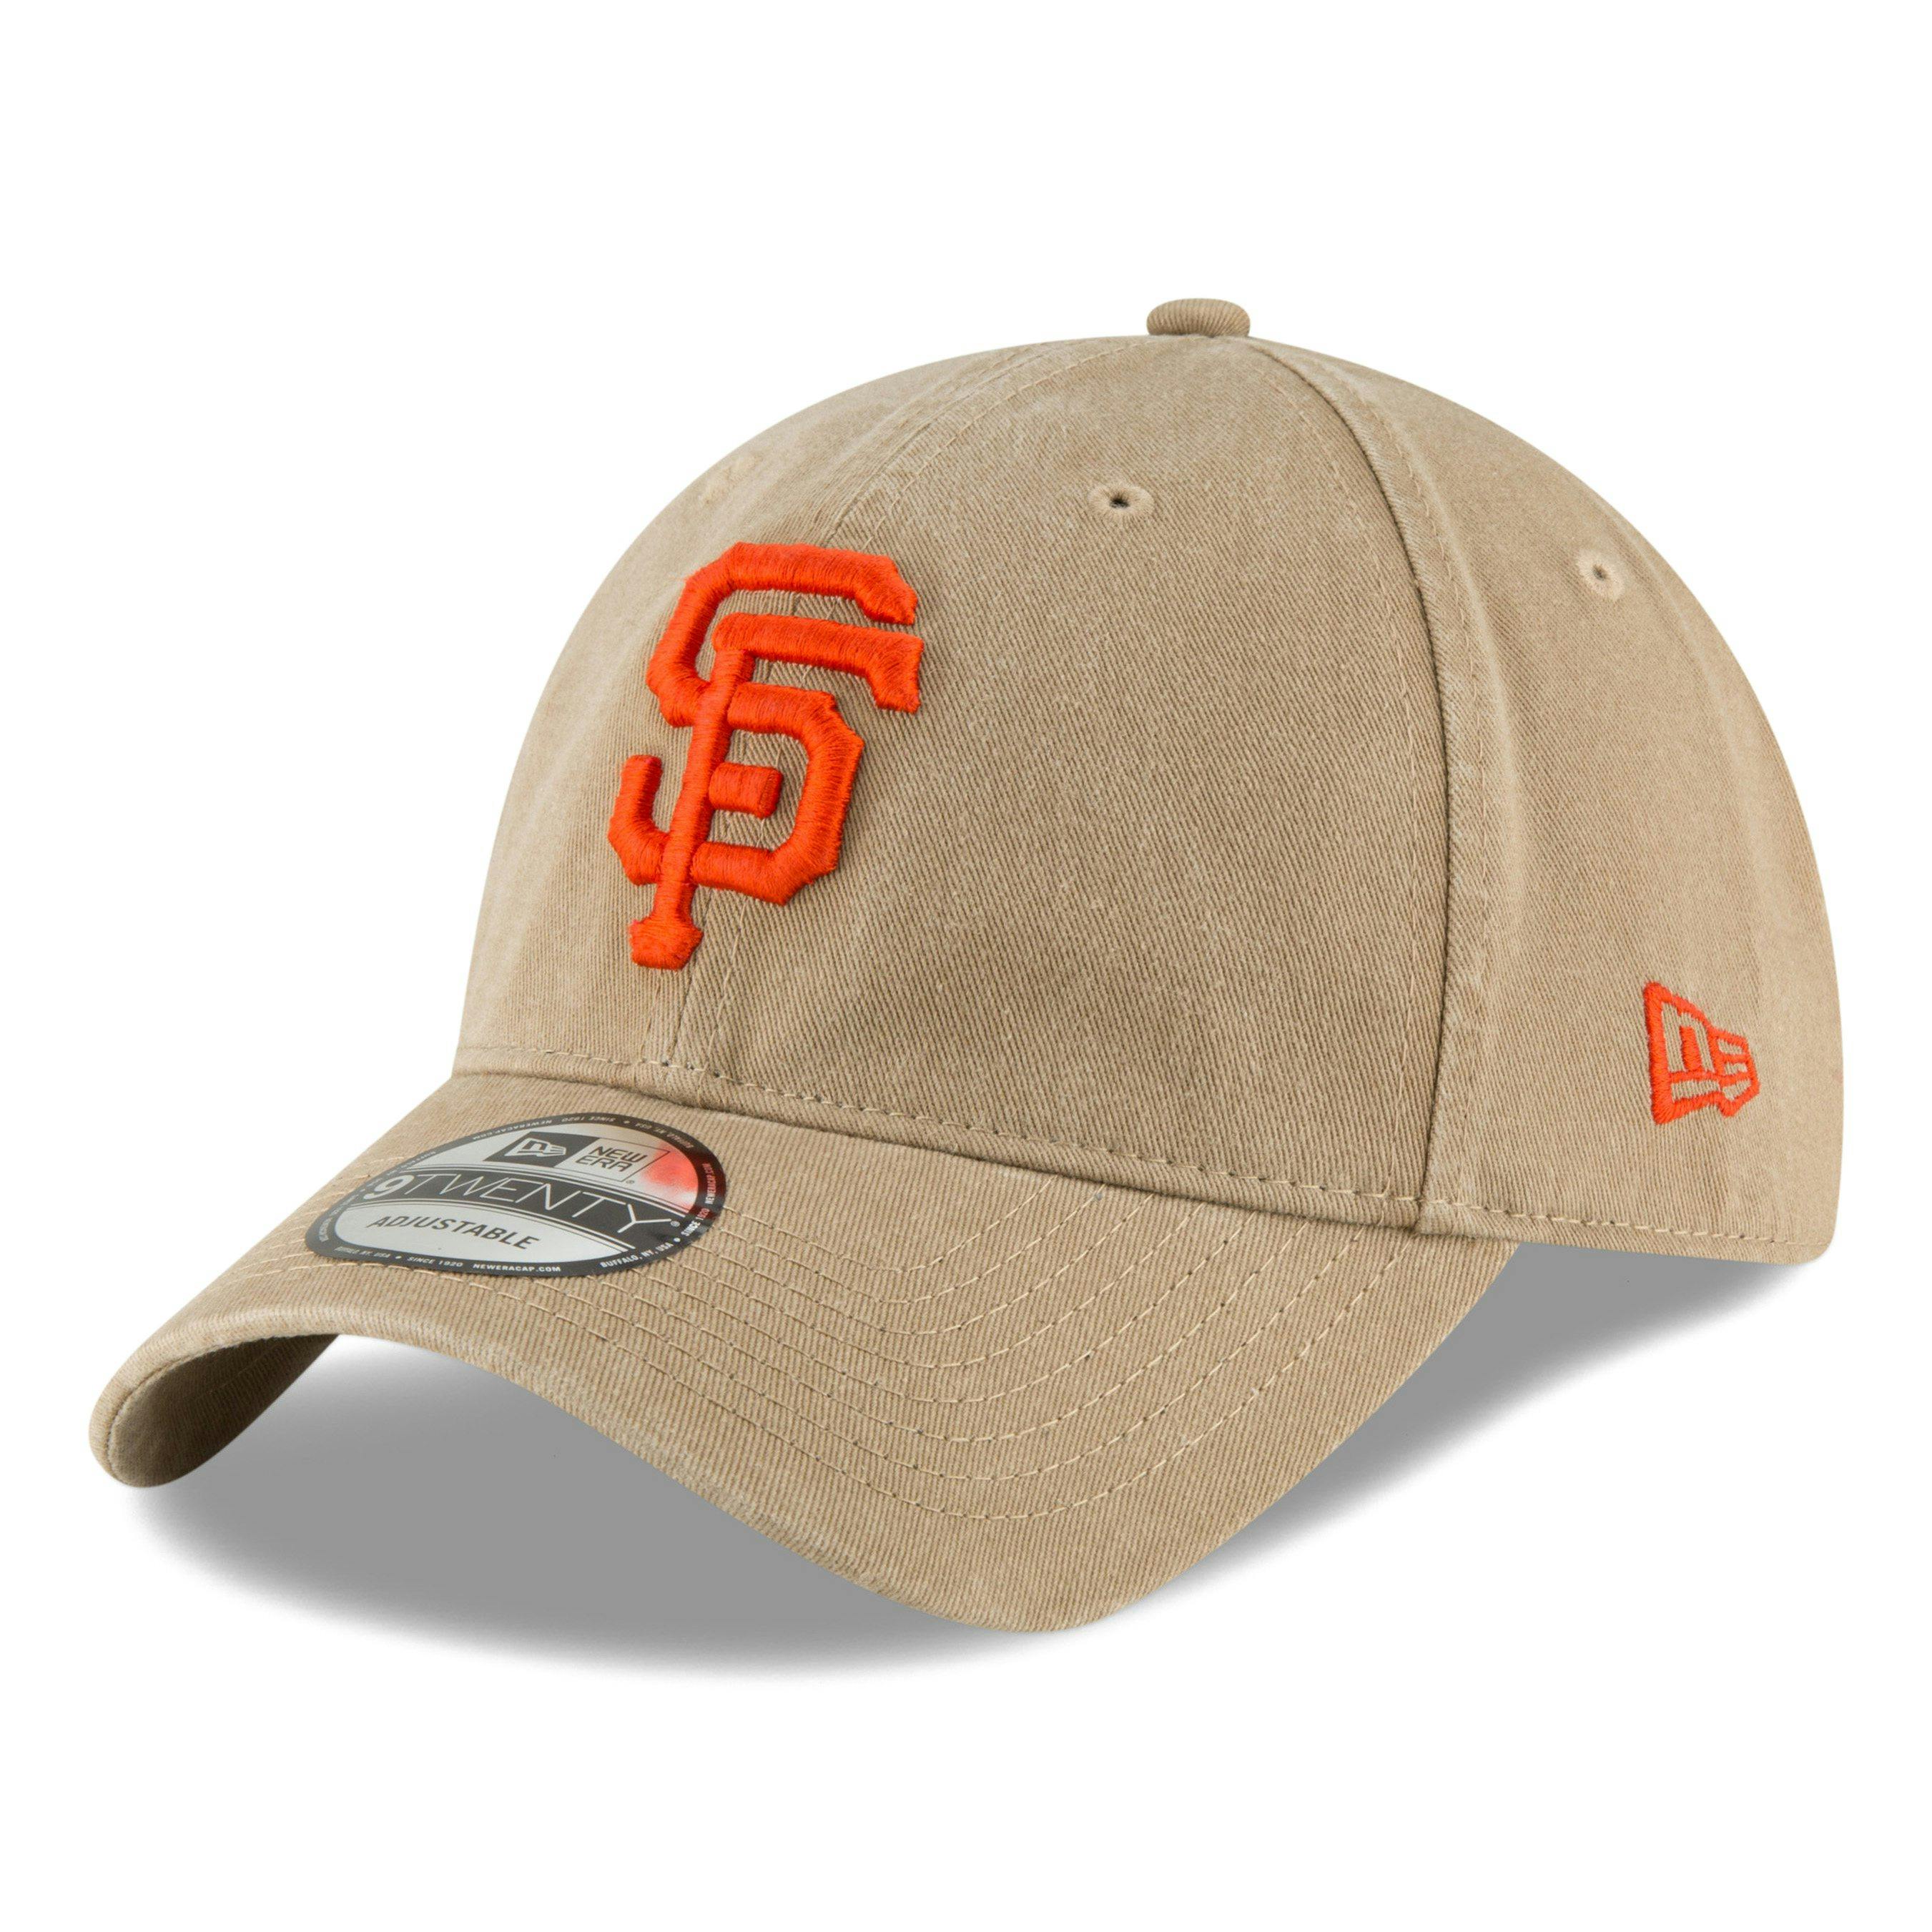 Official Stitches San Francisco Giants Gear, Stitches Giants Merchandise,  Stitches Originals and More